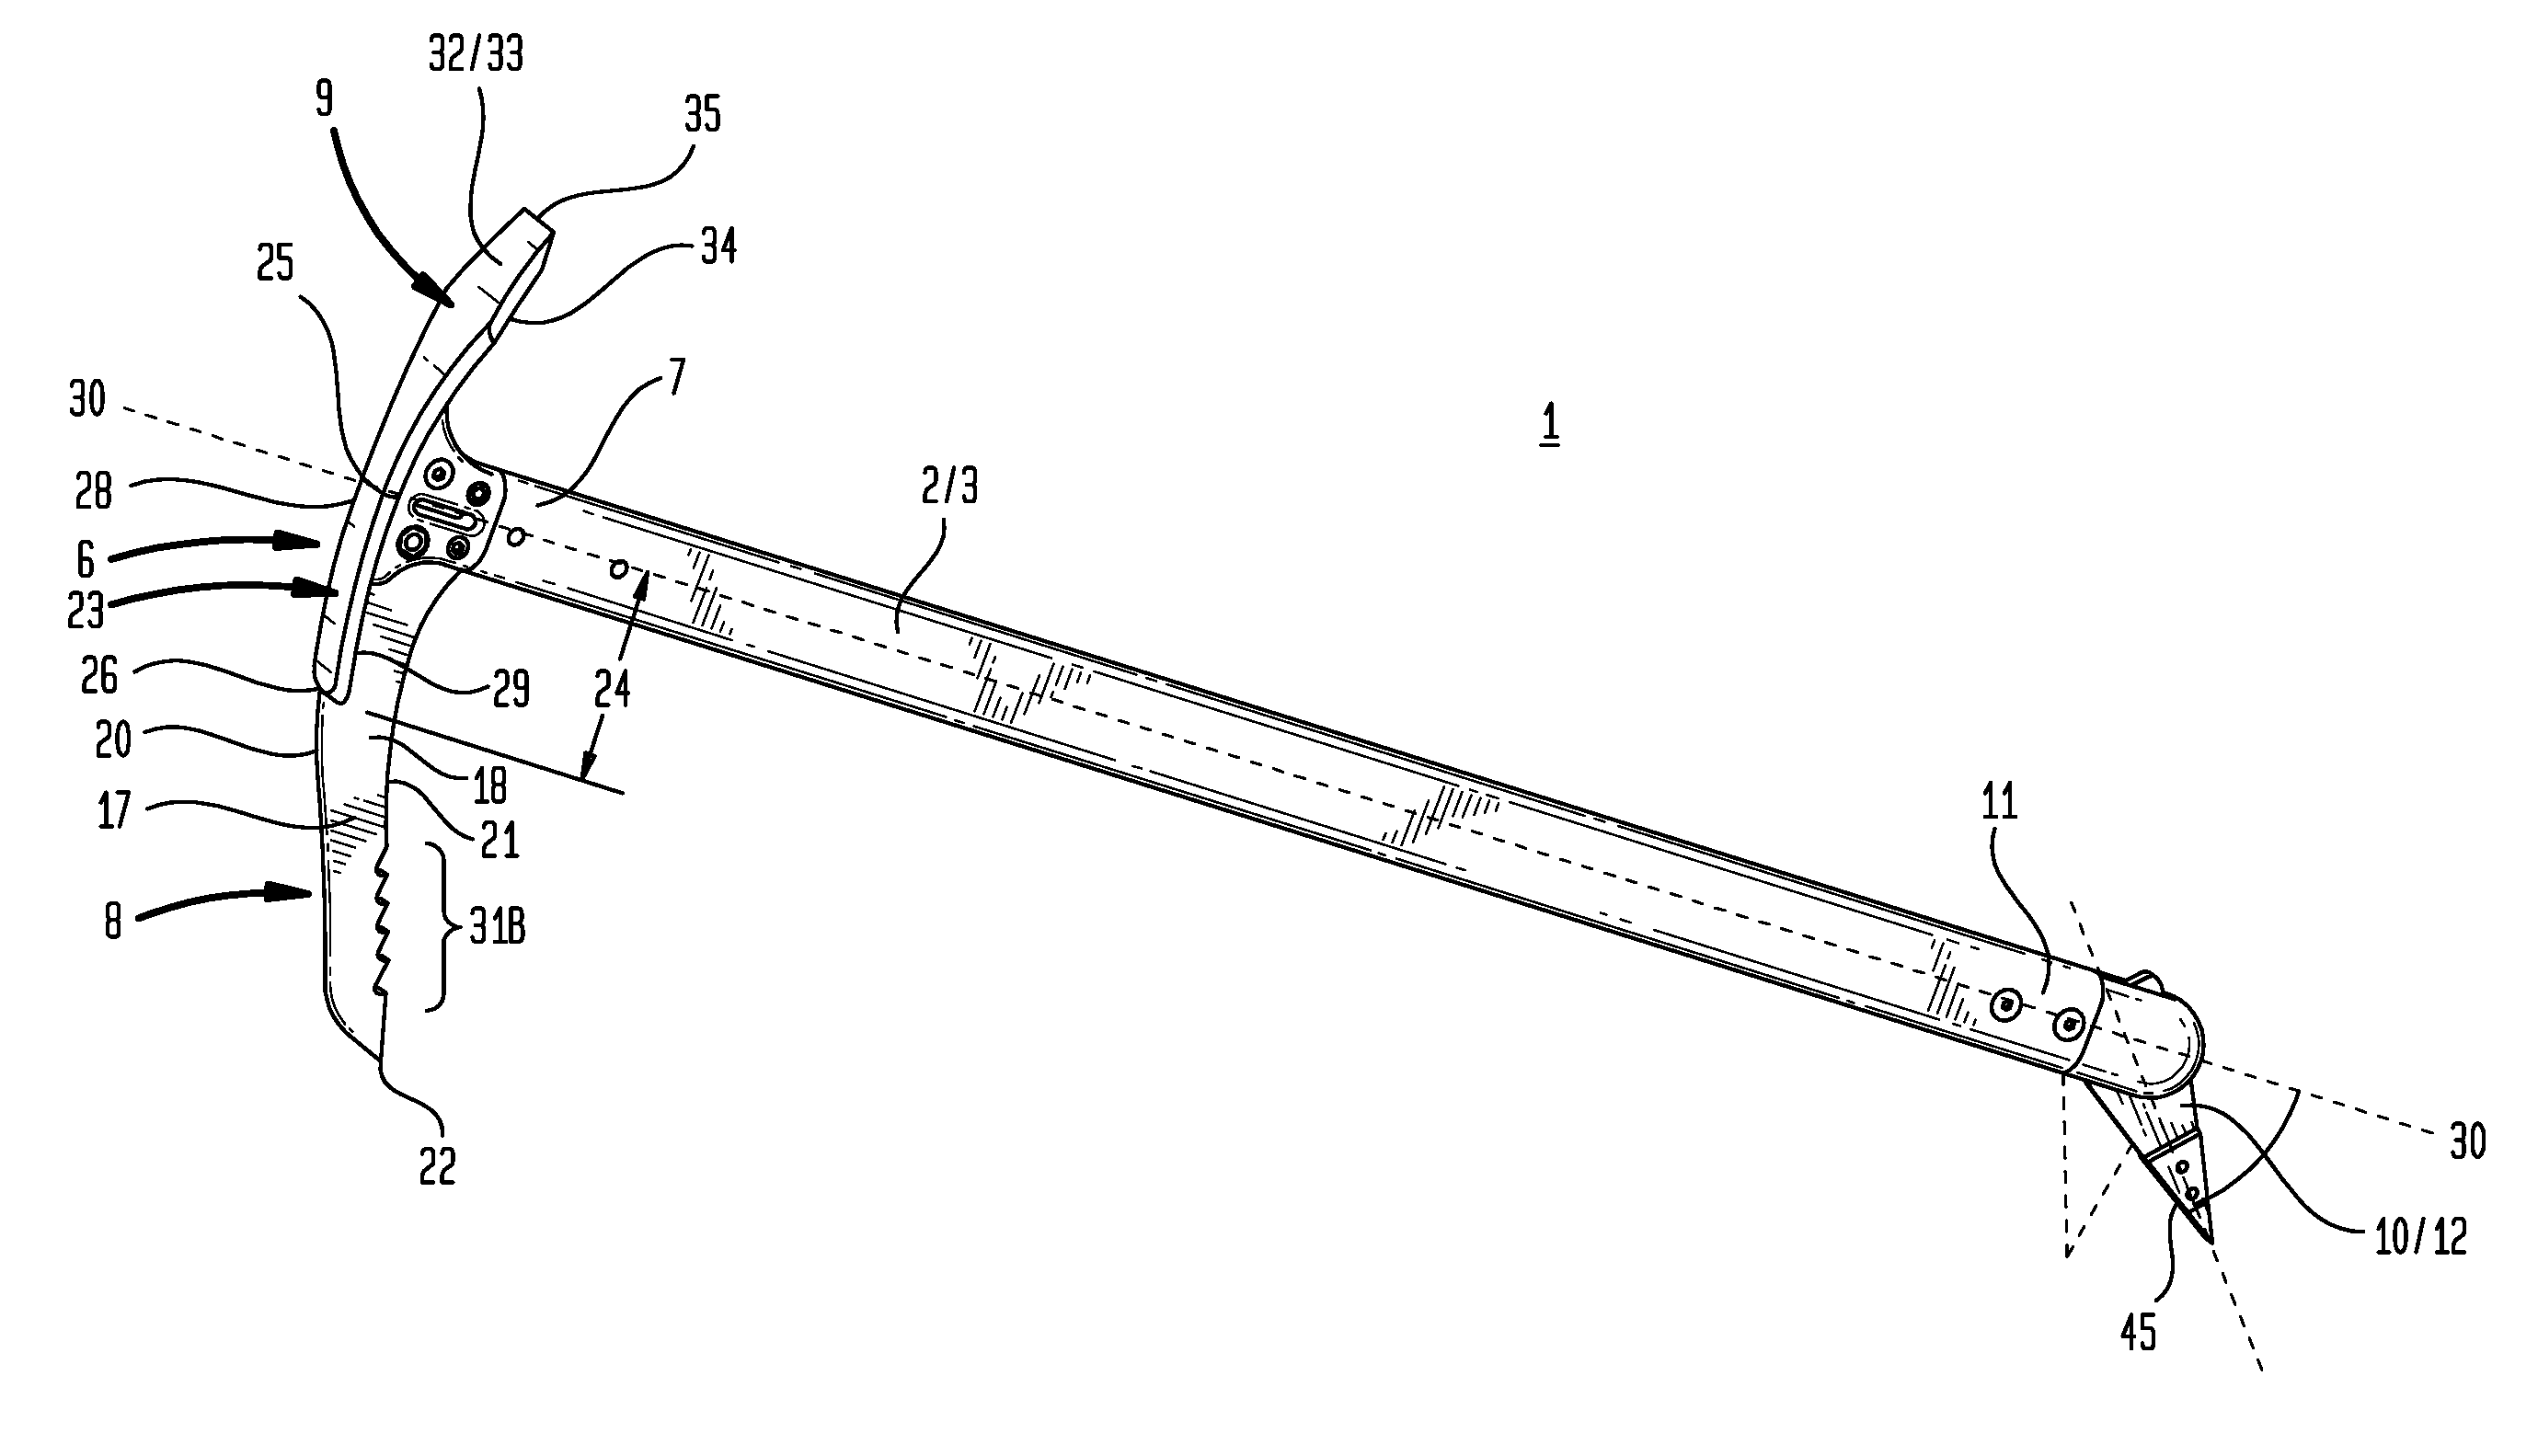 Multi-purpose ice axe including rotating spike